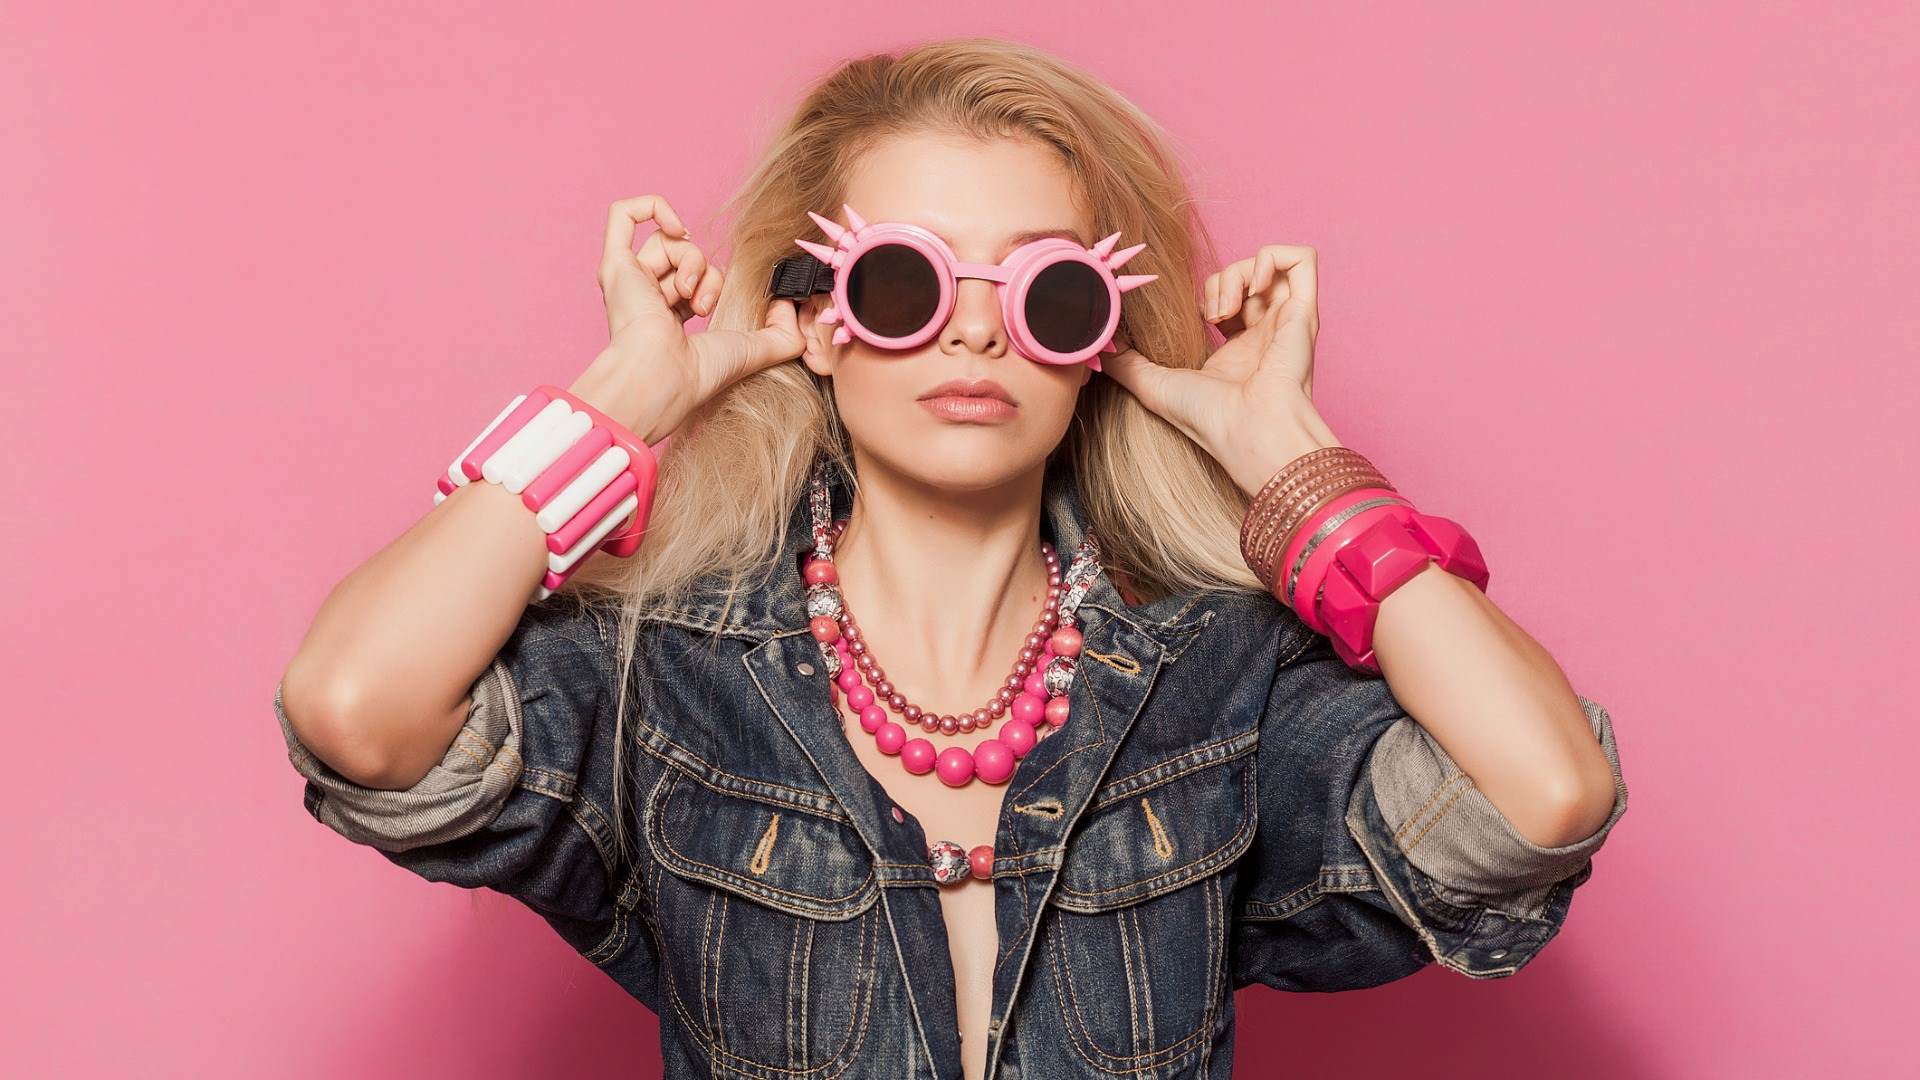 Blond woman wearing denim jacket and pink fashion accessories